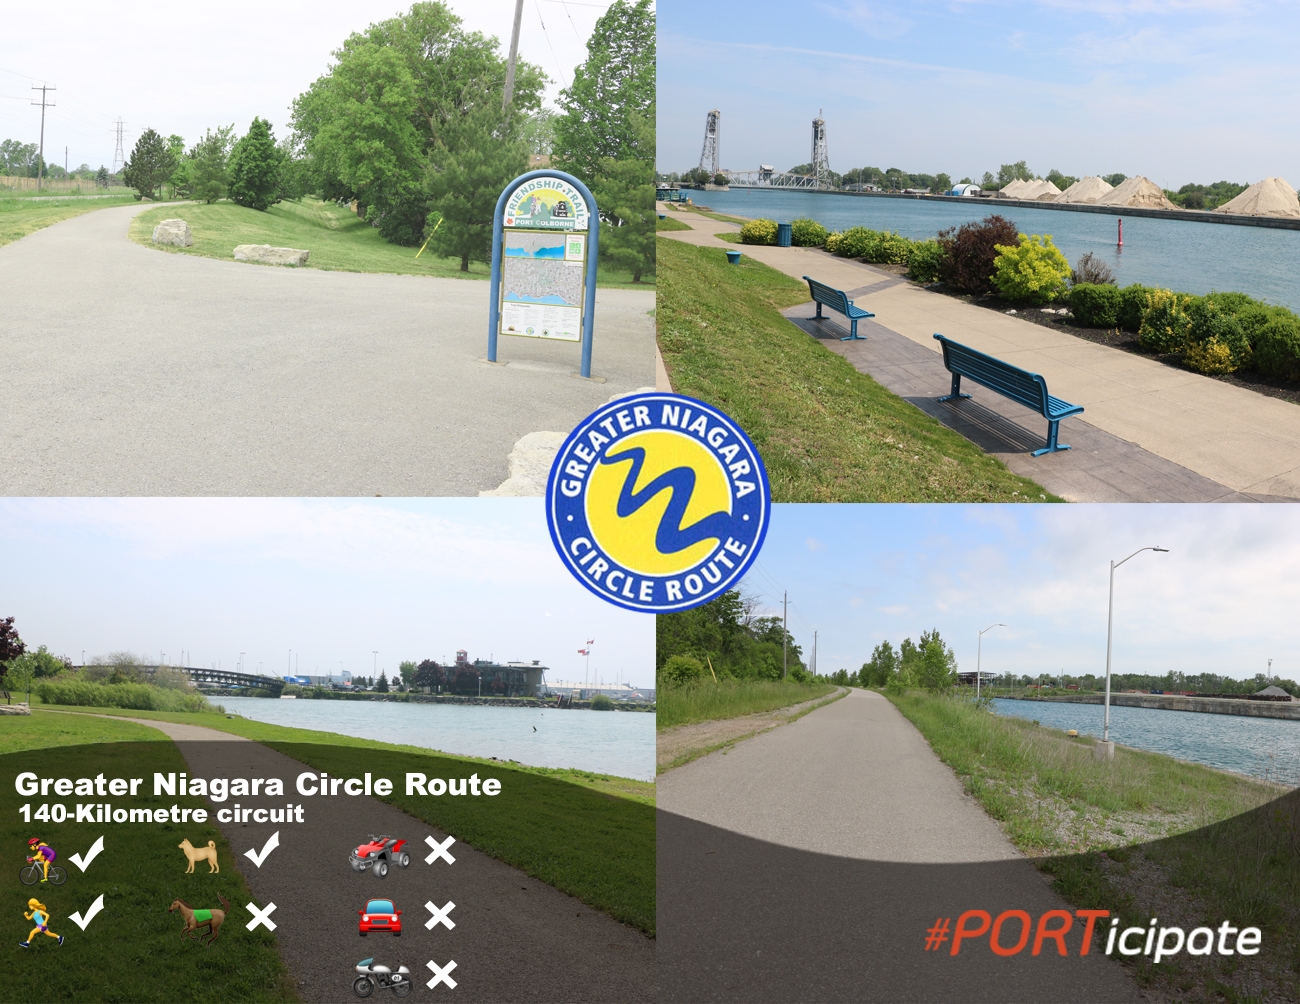 Greater Niagara Circle Route Images